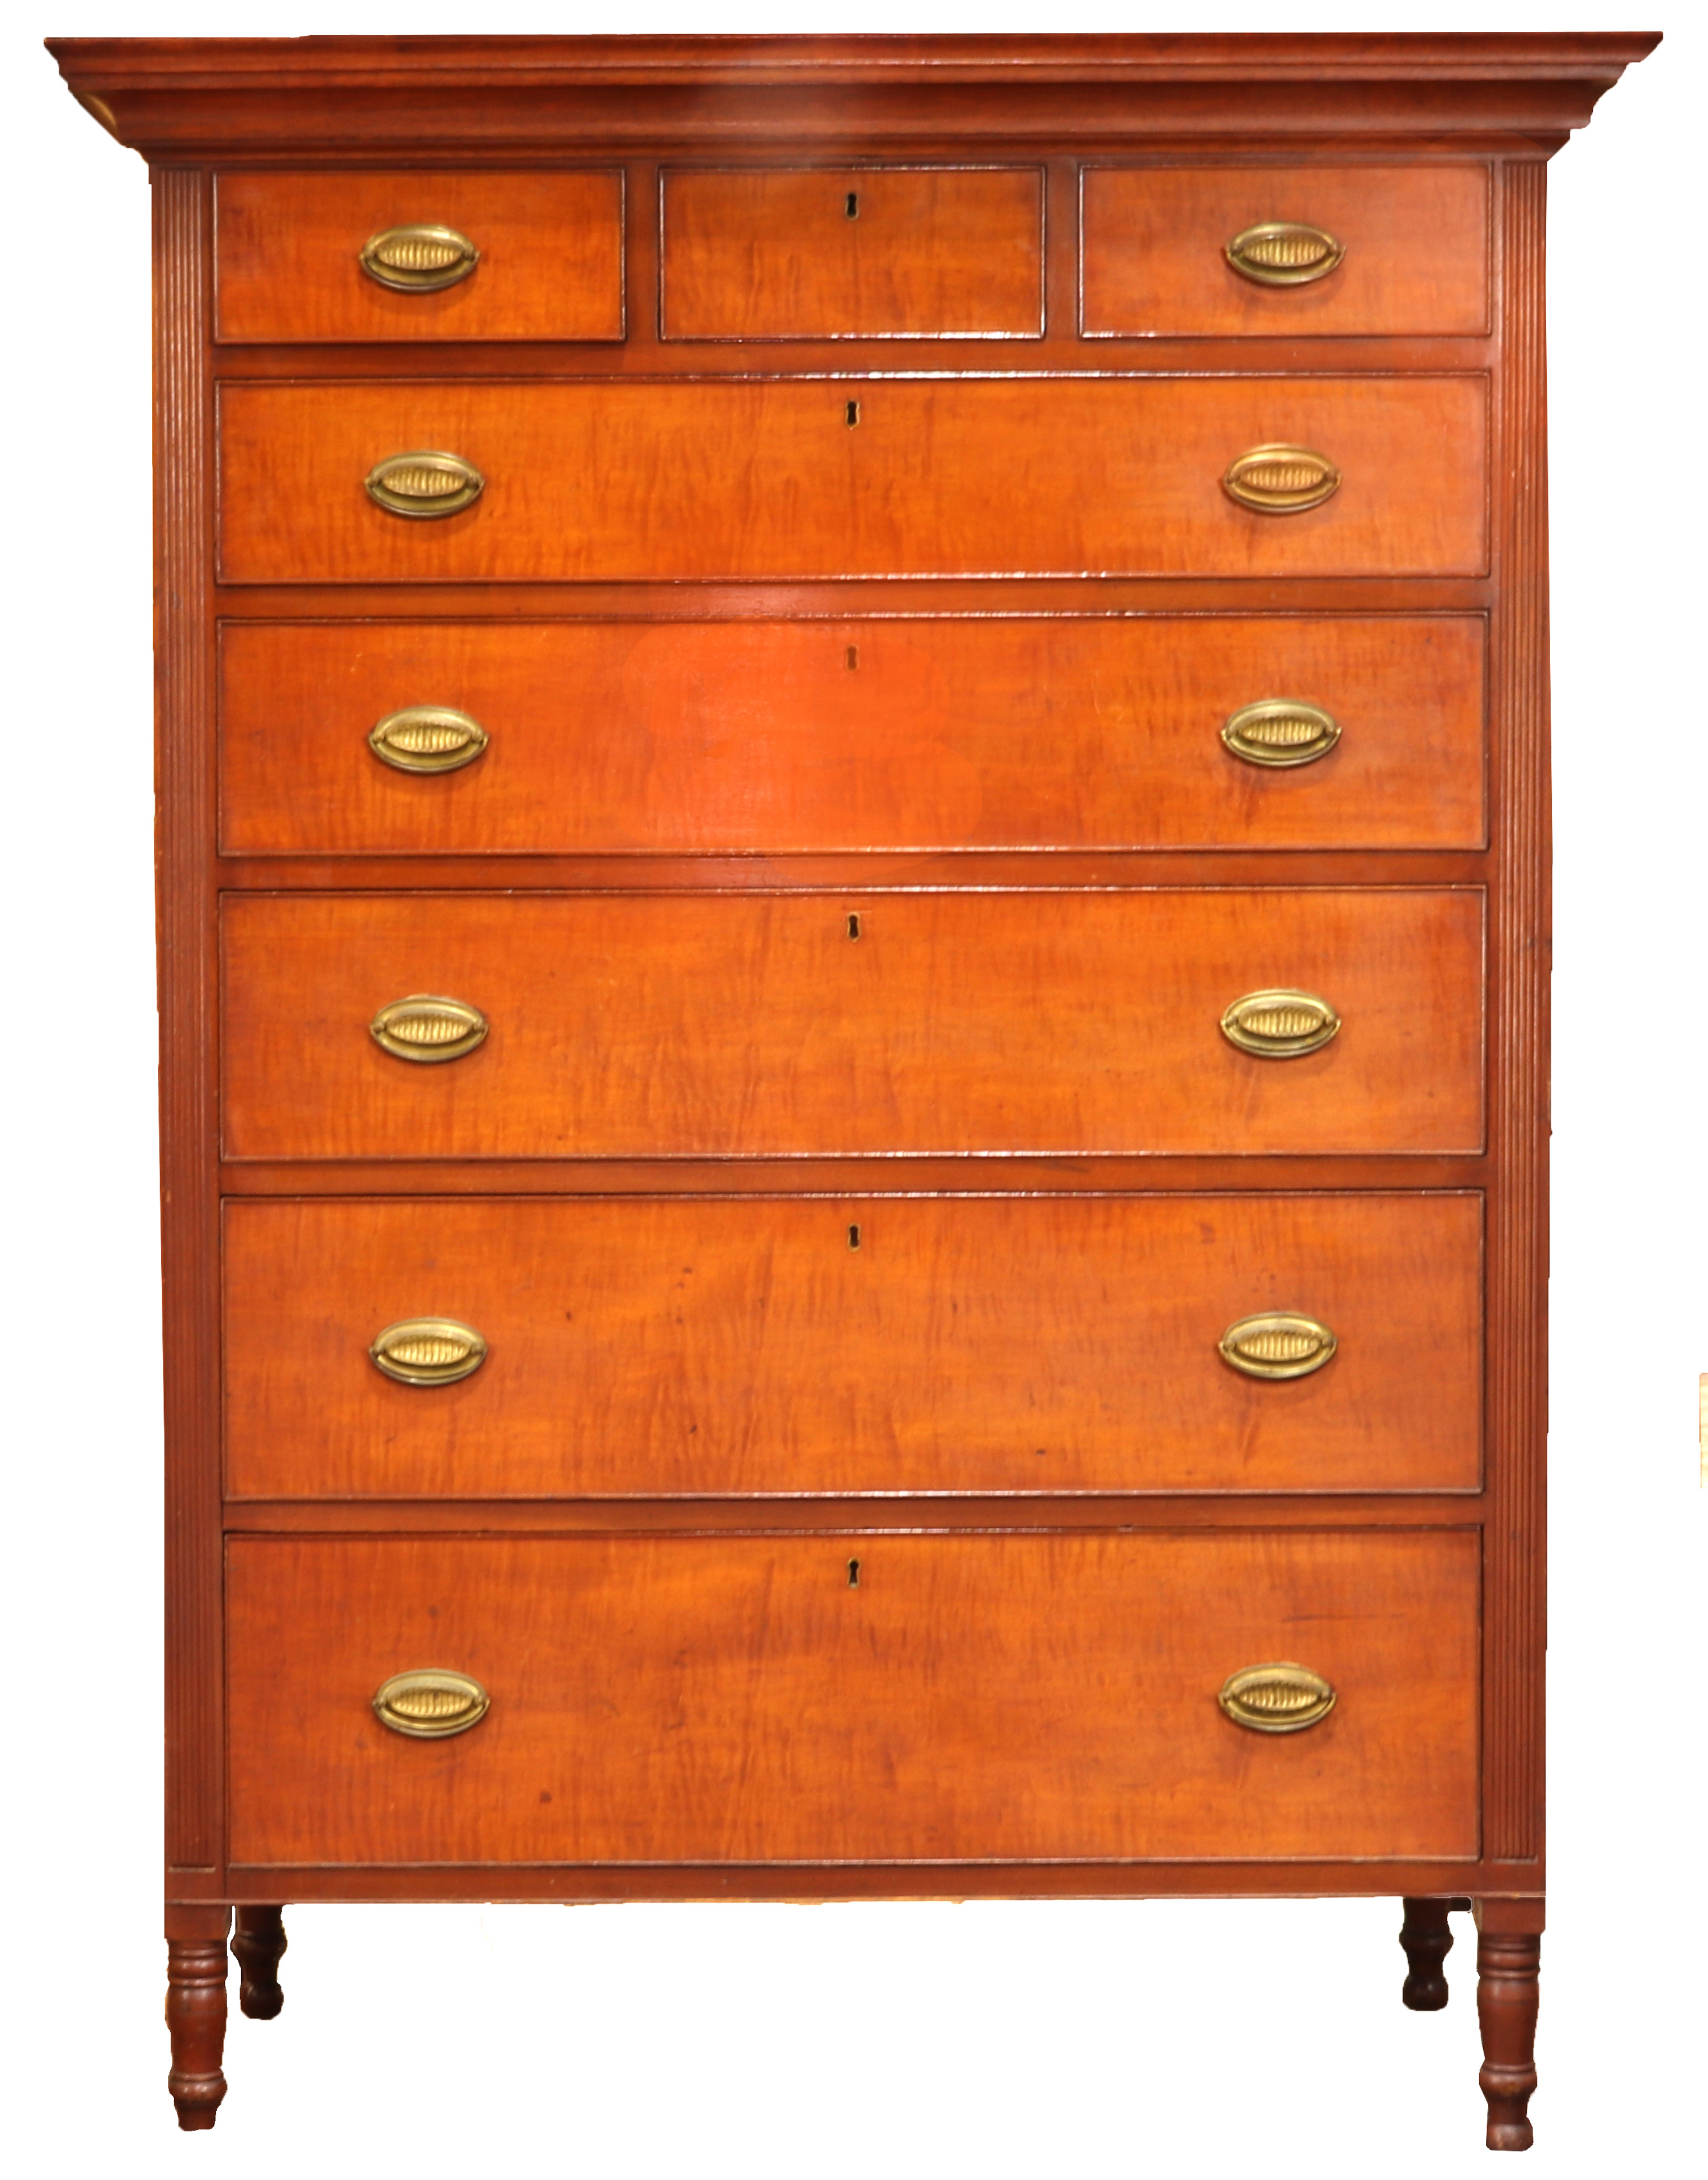 An American Federal cherry chest of drawers - Image 2 of 8